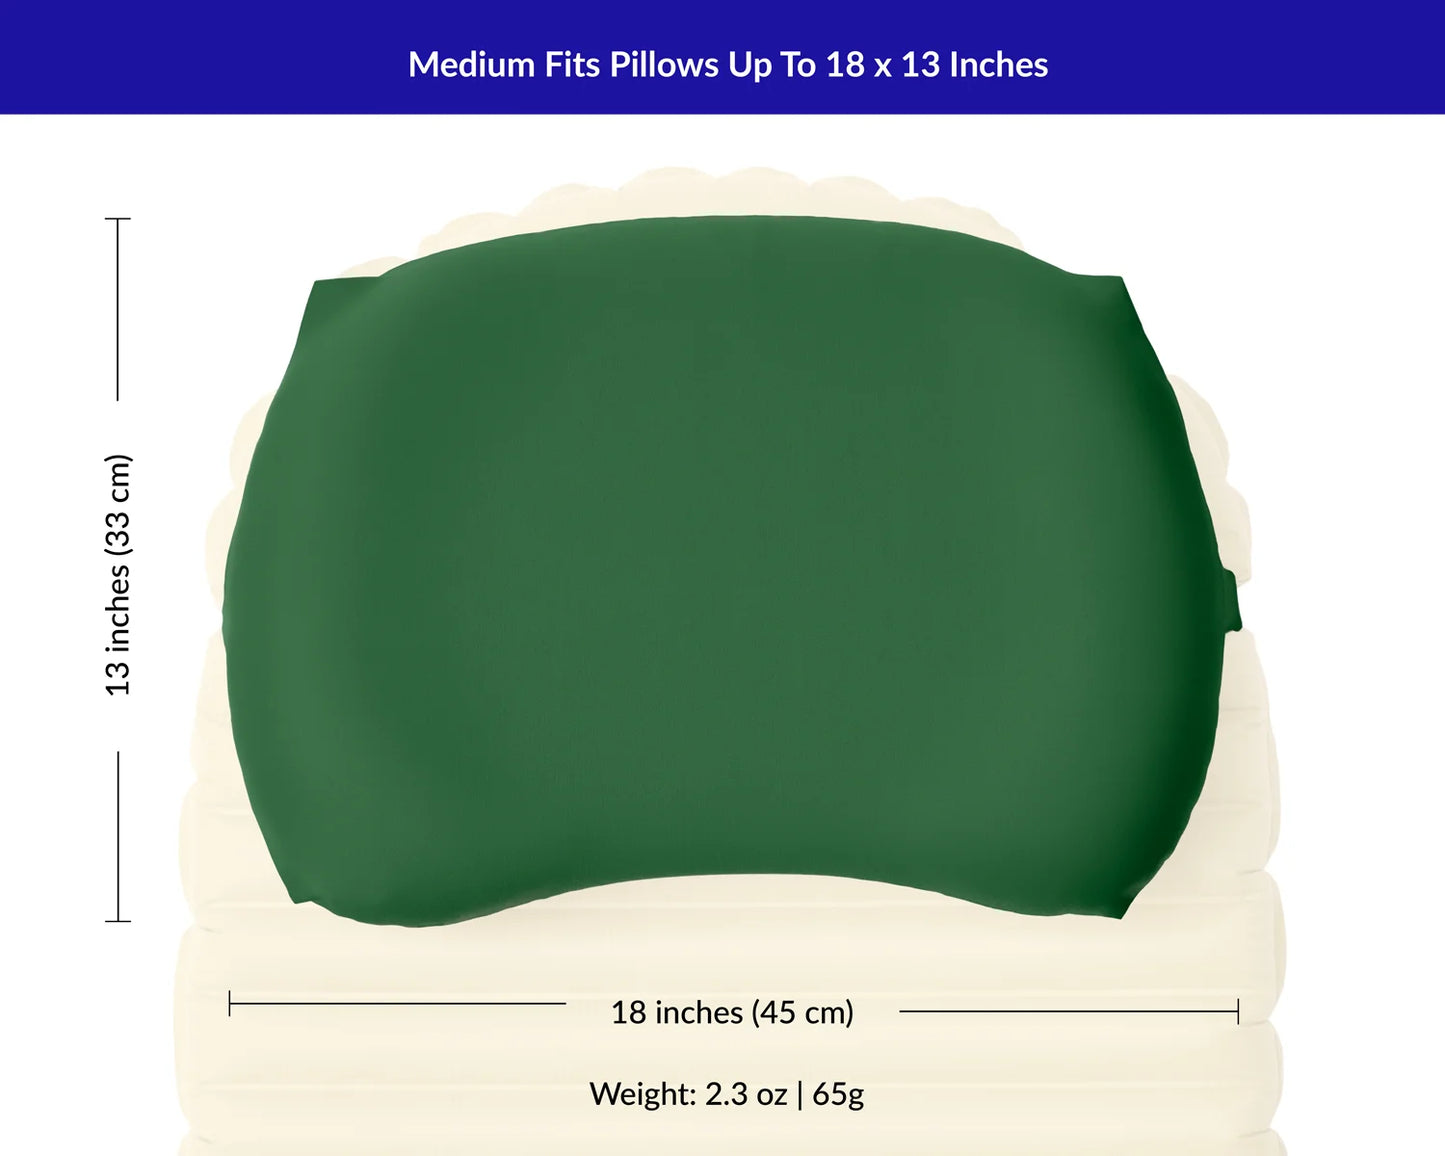 Measurements for max camp pillow size for medium Pillow Strap is 18 by 13 inches.